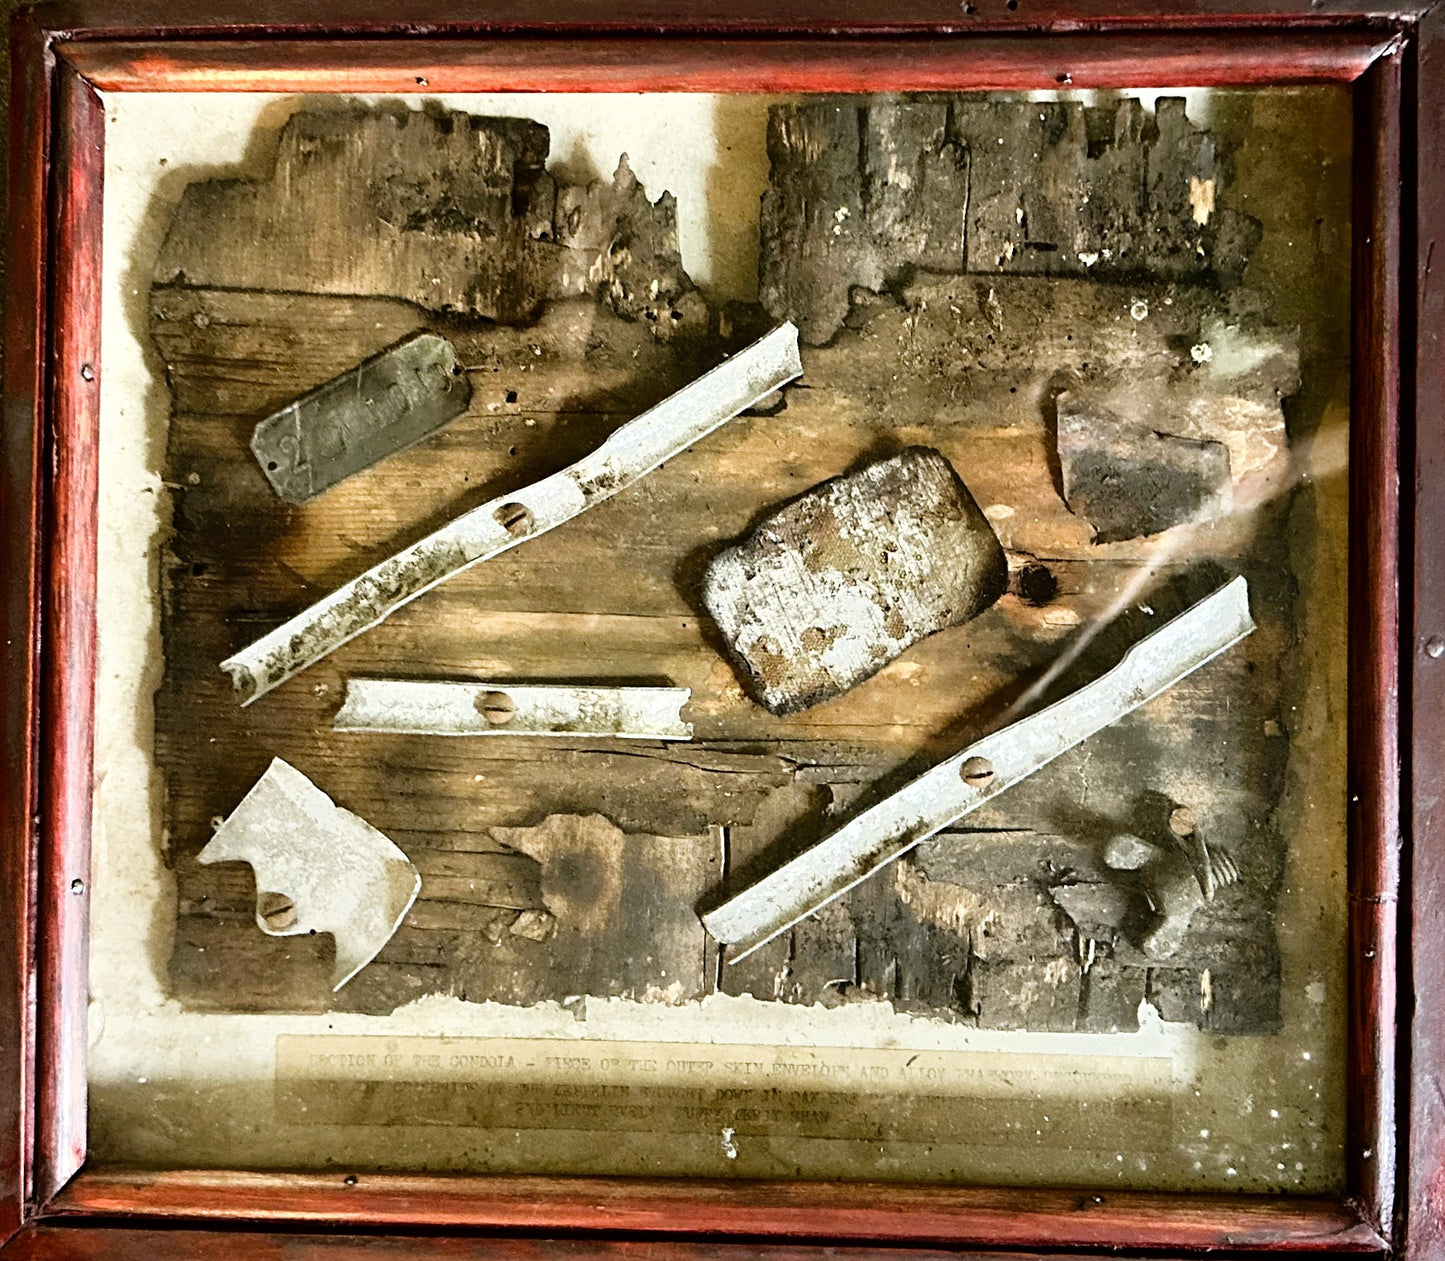 Framed Collage of Artifacts from the L-31 Zeppelin - Derrittmeister Militaria Group